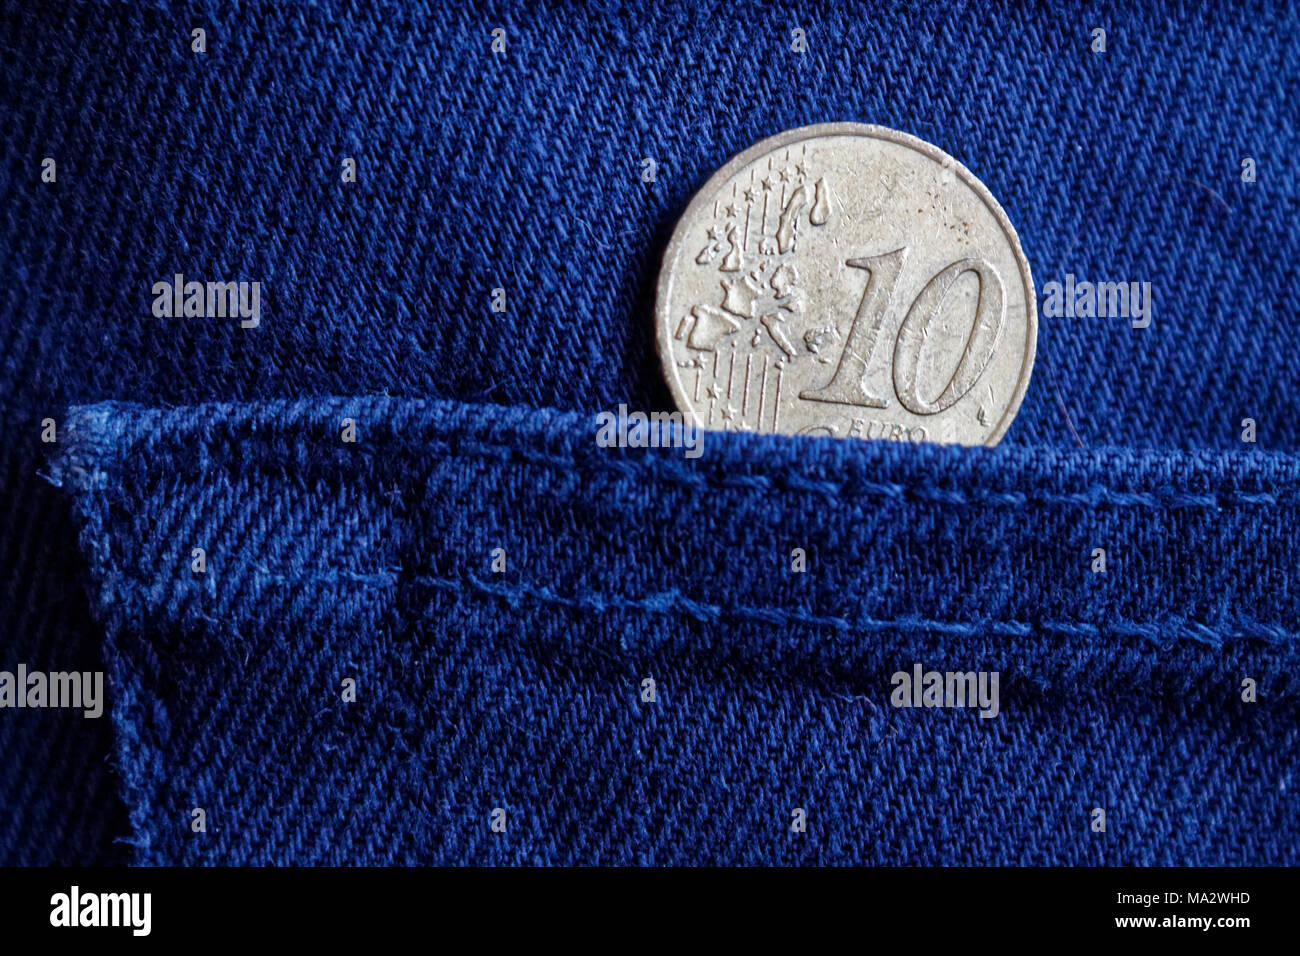 Euro coin with a denomination of 10 euro cent in the pocket of blue denim  jeans Stock Photo - Alamy